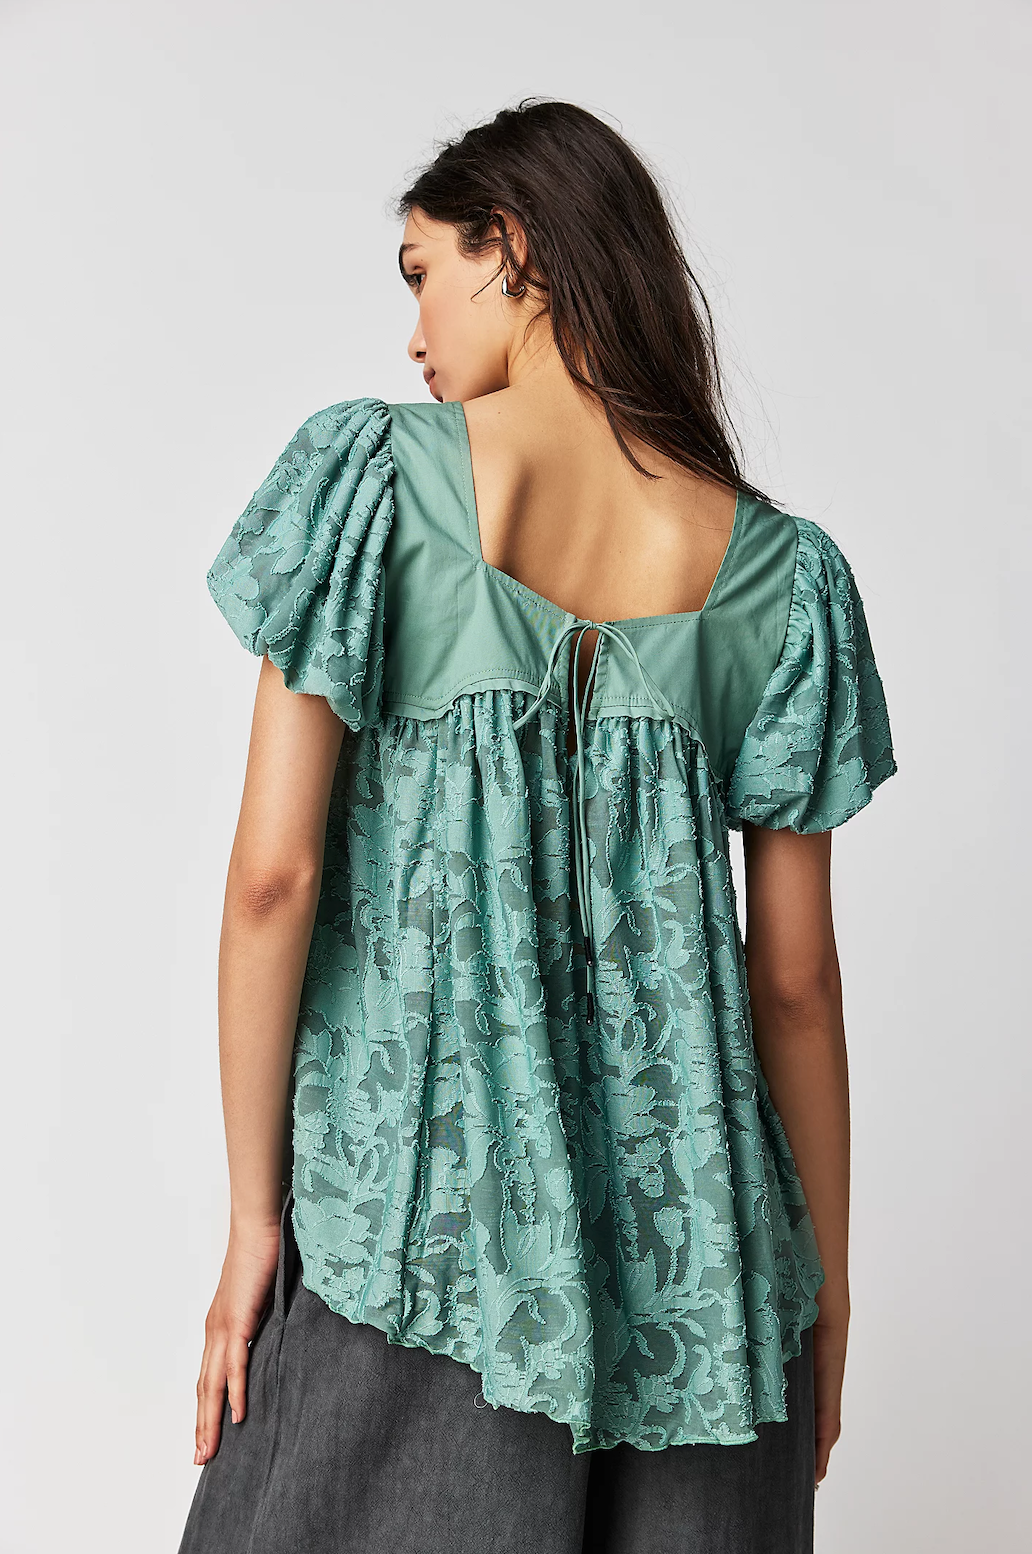 FREE PEOPLE SUNRISE TO SUNSET TOP IN MALACHITE